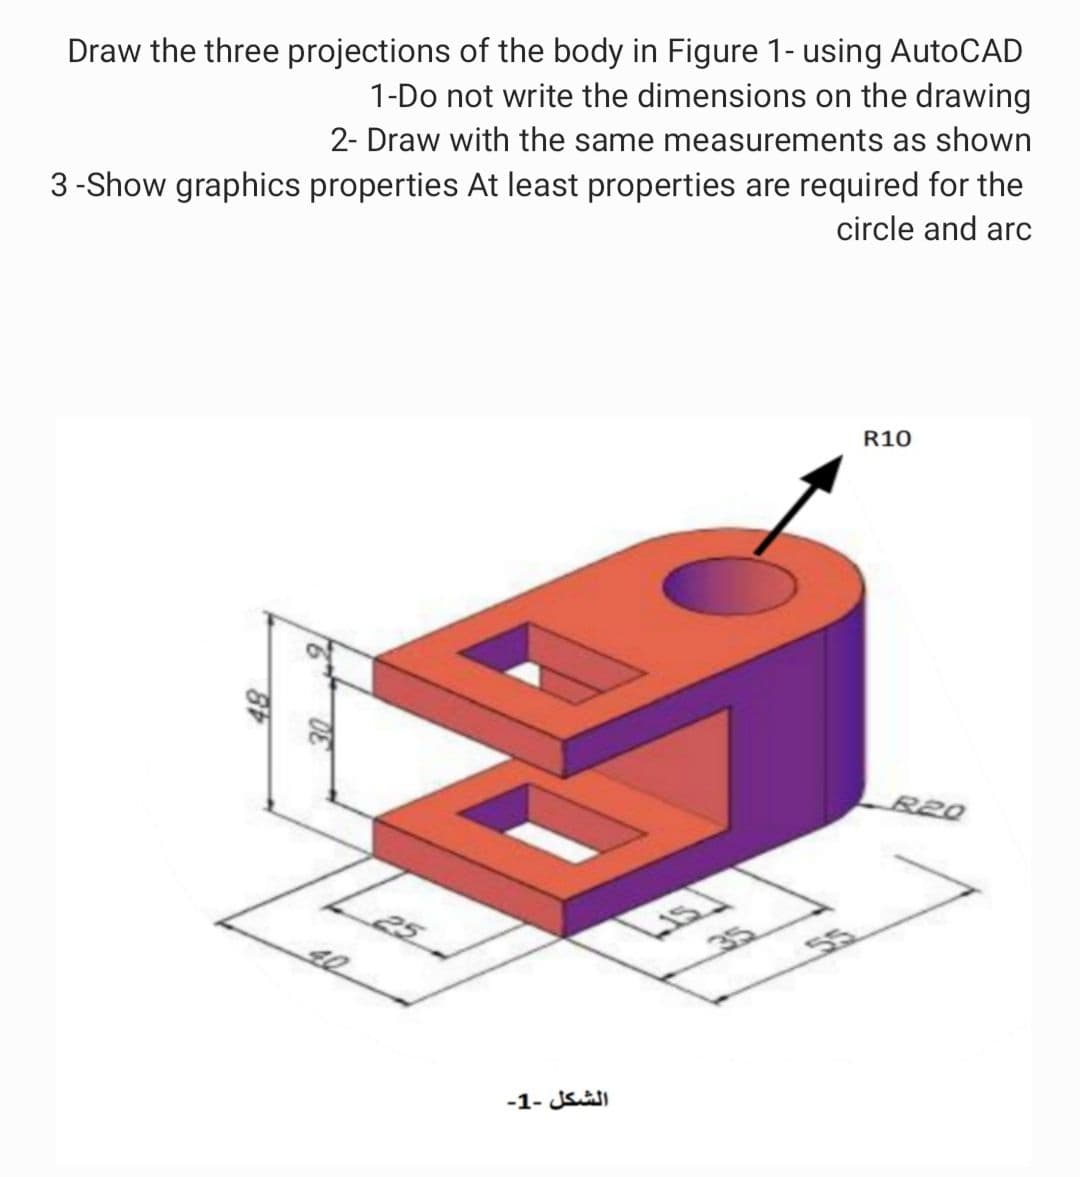 Draw the three projections of the body in Figure 1- using AutoCAD
1-Do not write the dimensions on the drawing
2- Draw with the same measurements as shown
3 -Show graphics properties At least properties are required for the
circle and arc
R10
R20
40
35
55
-1- JSI
9.
